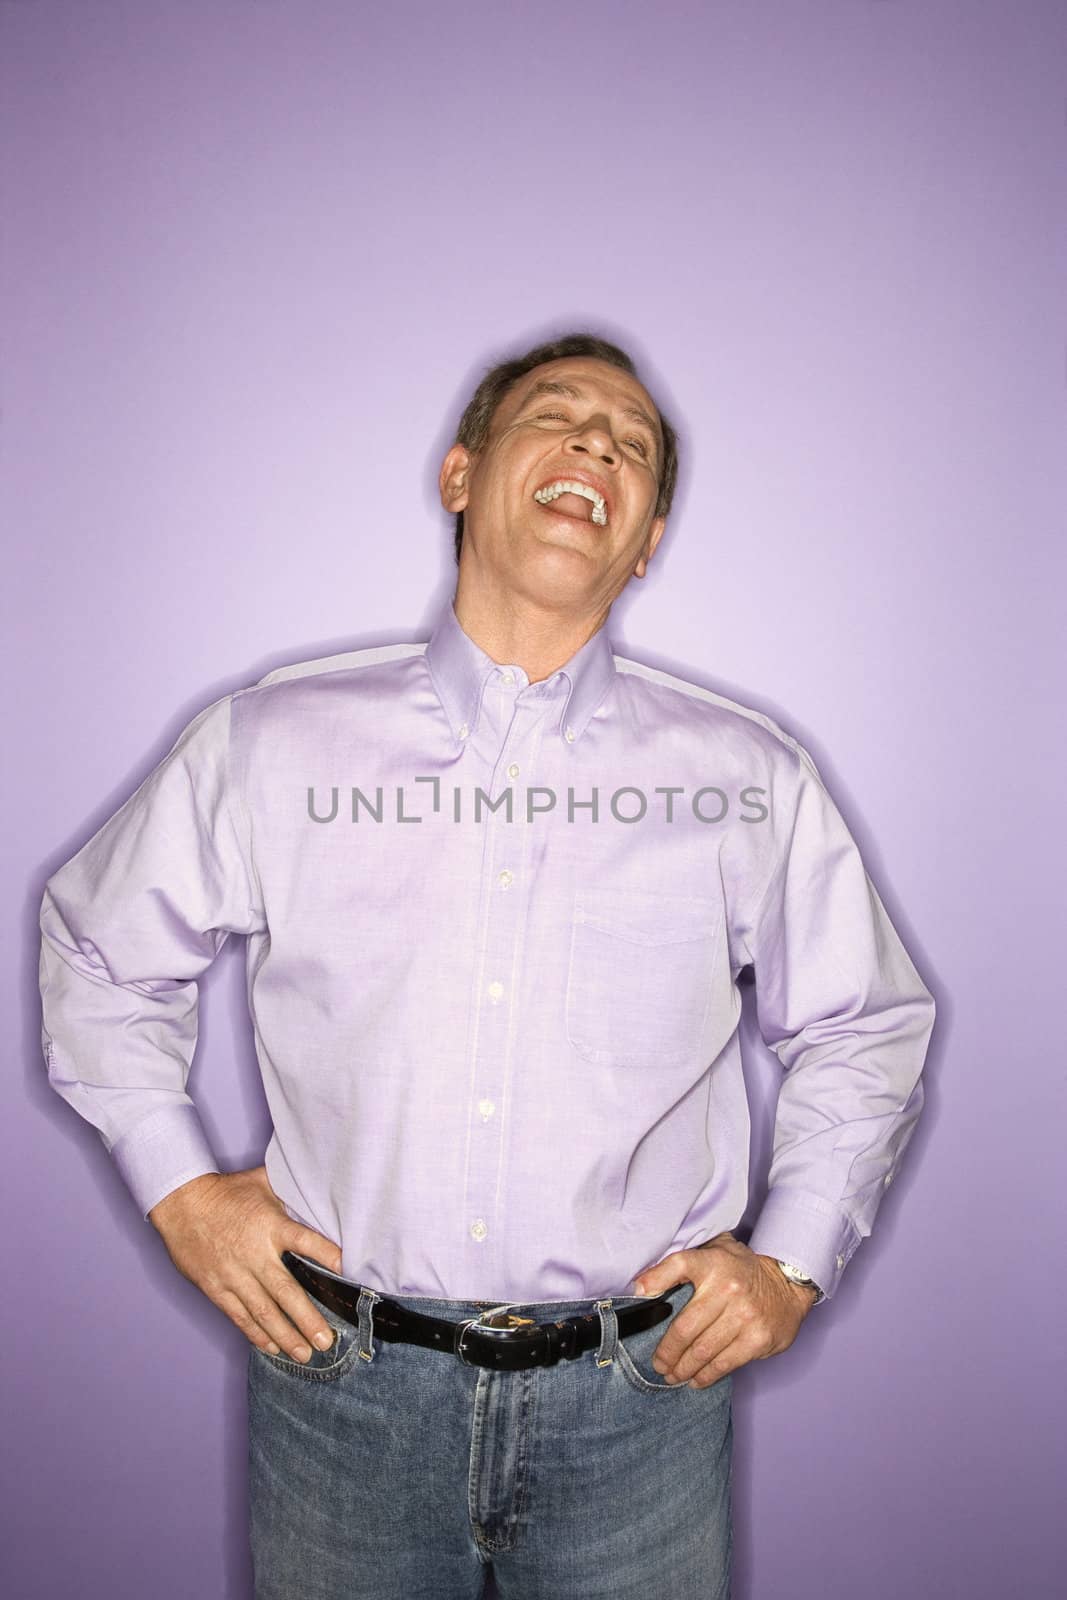 Laughing middle-aged Caucasian man wearing purple clothing on purple background.